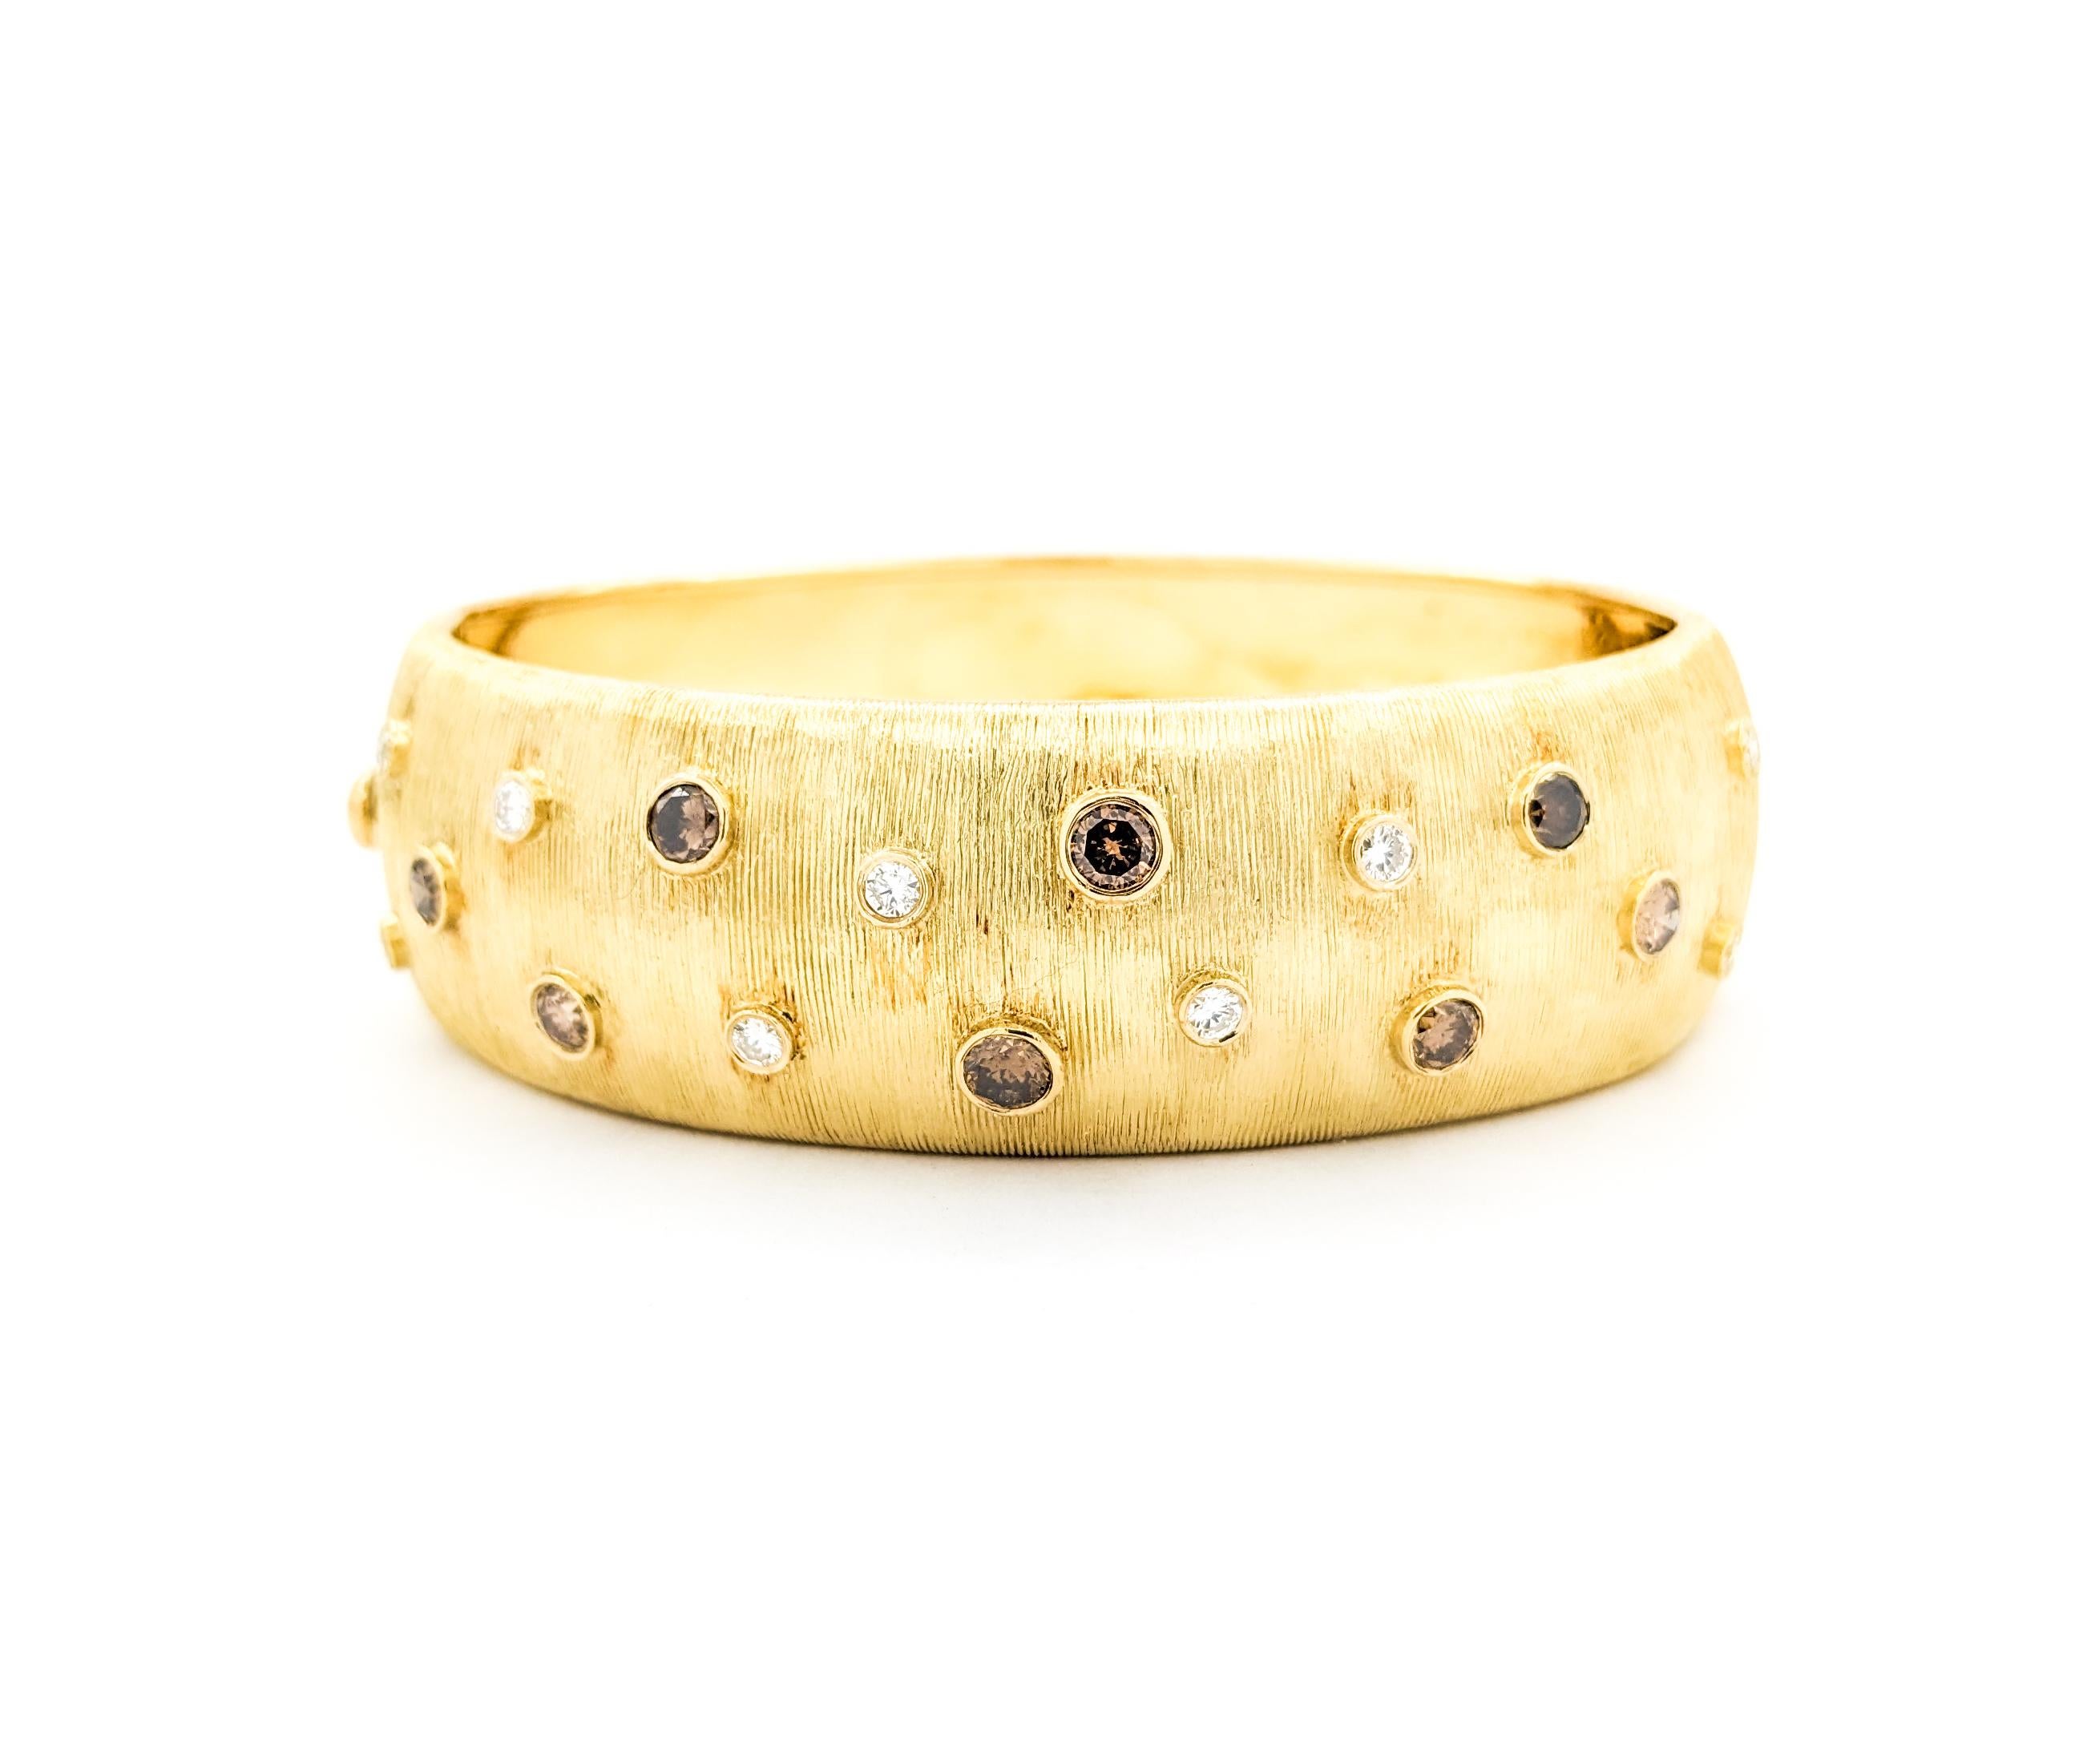 .80ctw Brown Diamond & .36ctw White Diamond Rudolph Friedmann Hinged Bangle Bracelet In Yellow Gold

This luxurious Rudolph Friedmann Hinged Bangle Bracelet, exquisitely crafted in 18kt yellow gold, showcases an elegant design enhanced by .36ctw of